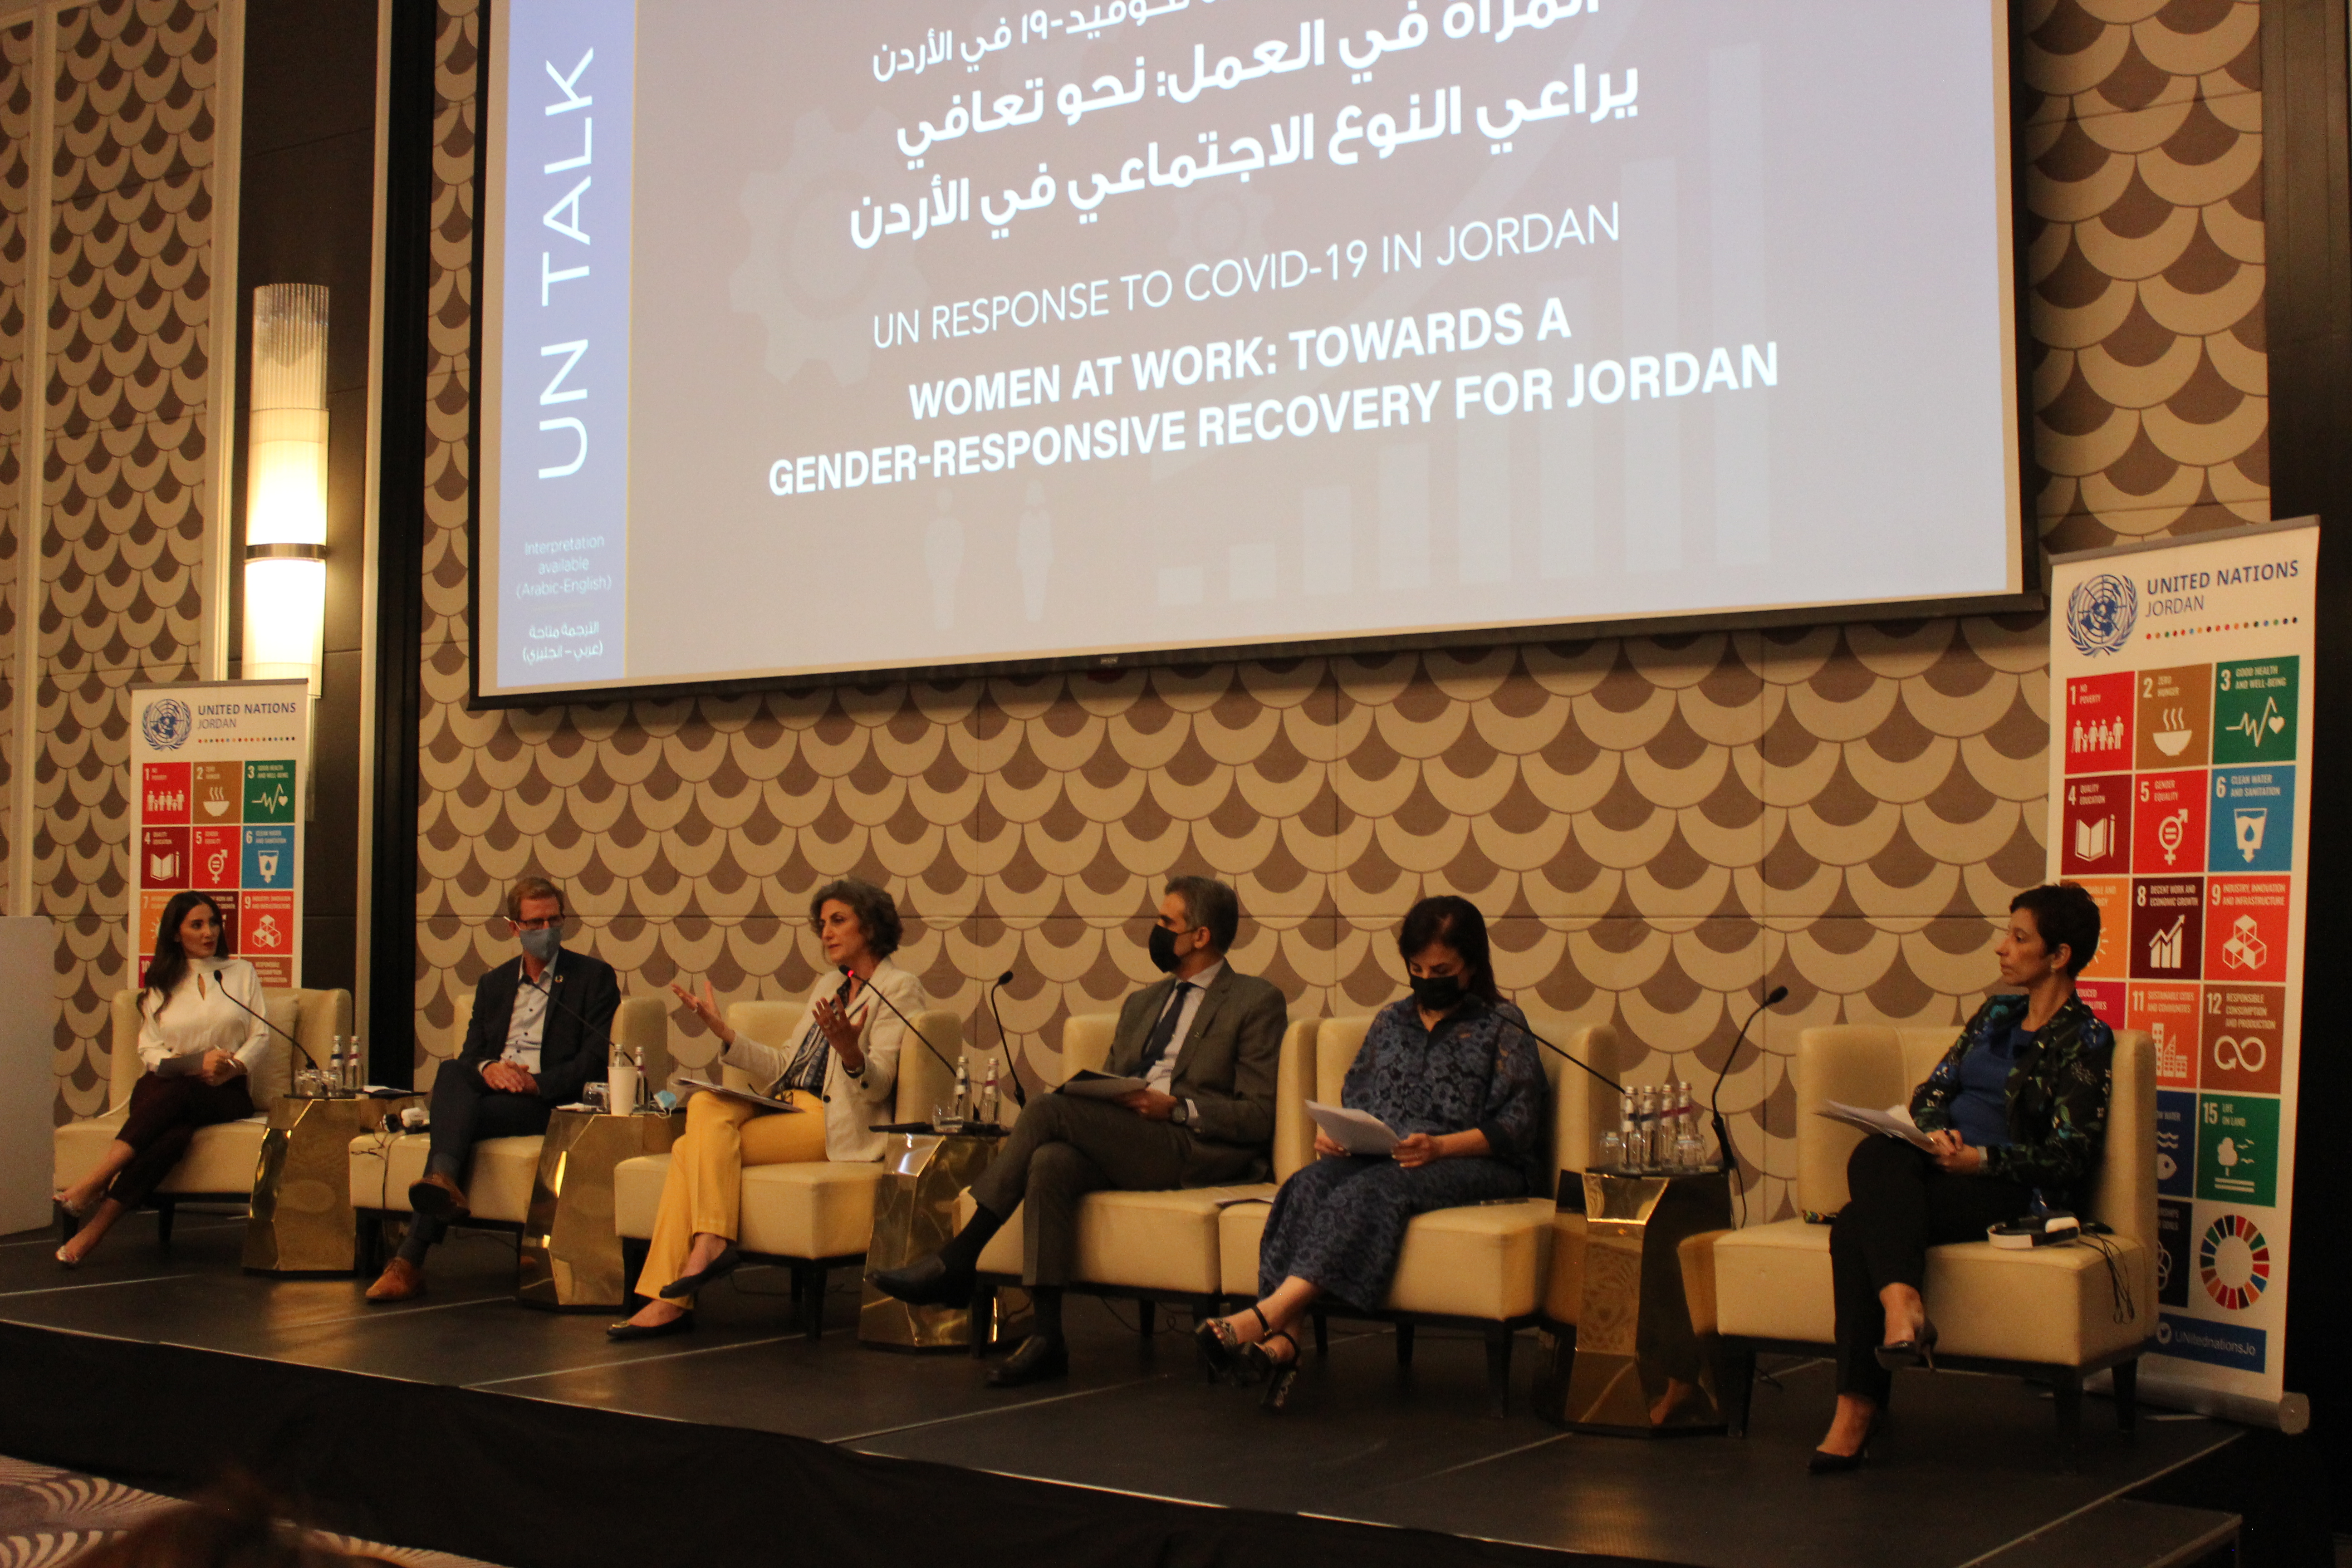 Mr. Anders Pedersen, the UN Resident and Humanitarian Coordinator in Jordan, Dr. S alma Nims, Secretary General of the Jordanian National Commission for Women, H.E. Dr. Hazim Rahahleh, Director of the Social Security Corporation, Ms. Nadia Al Saeed, Chief Executive of Bank Al Etihad, and H.E. Ms. Maria Hadjitheodosiou, the European Union (EU) Ambassador to Jordan at the UN Talk to discuss the importance of investing in women’s employment for economic and sustainable recovery from the COVID-19 pandemic. 